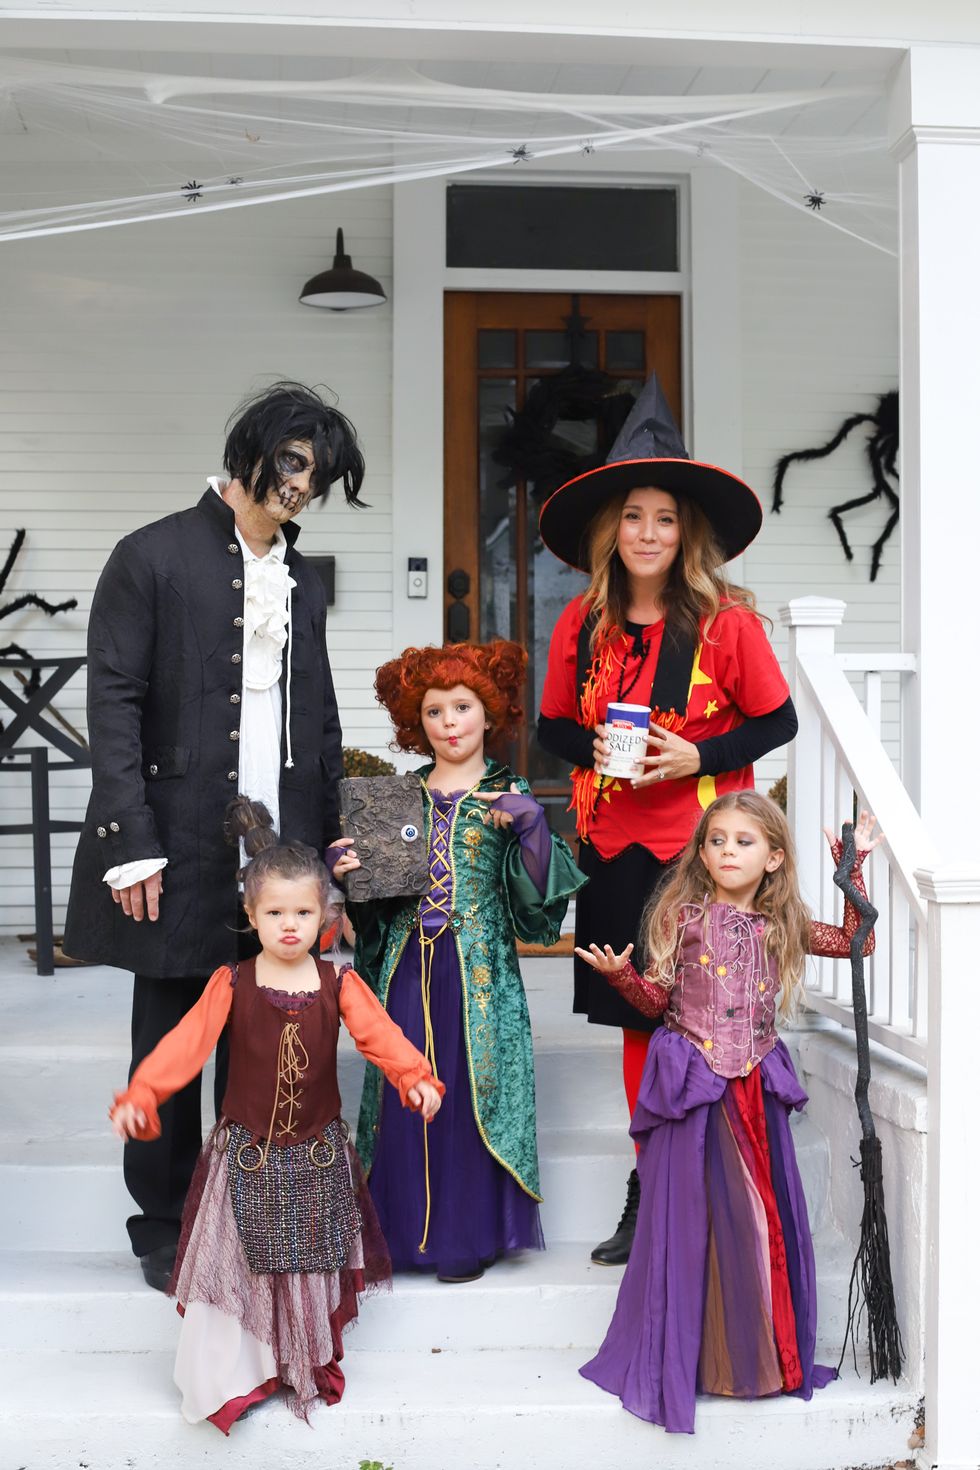 parents and 3 kids dressed as characters from hocus pocus movie for family costume